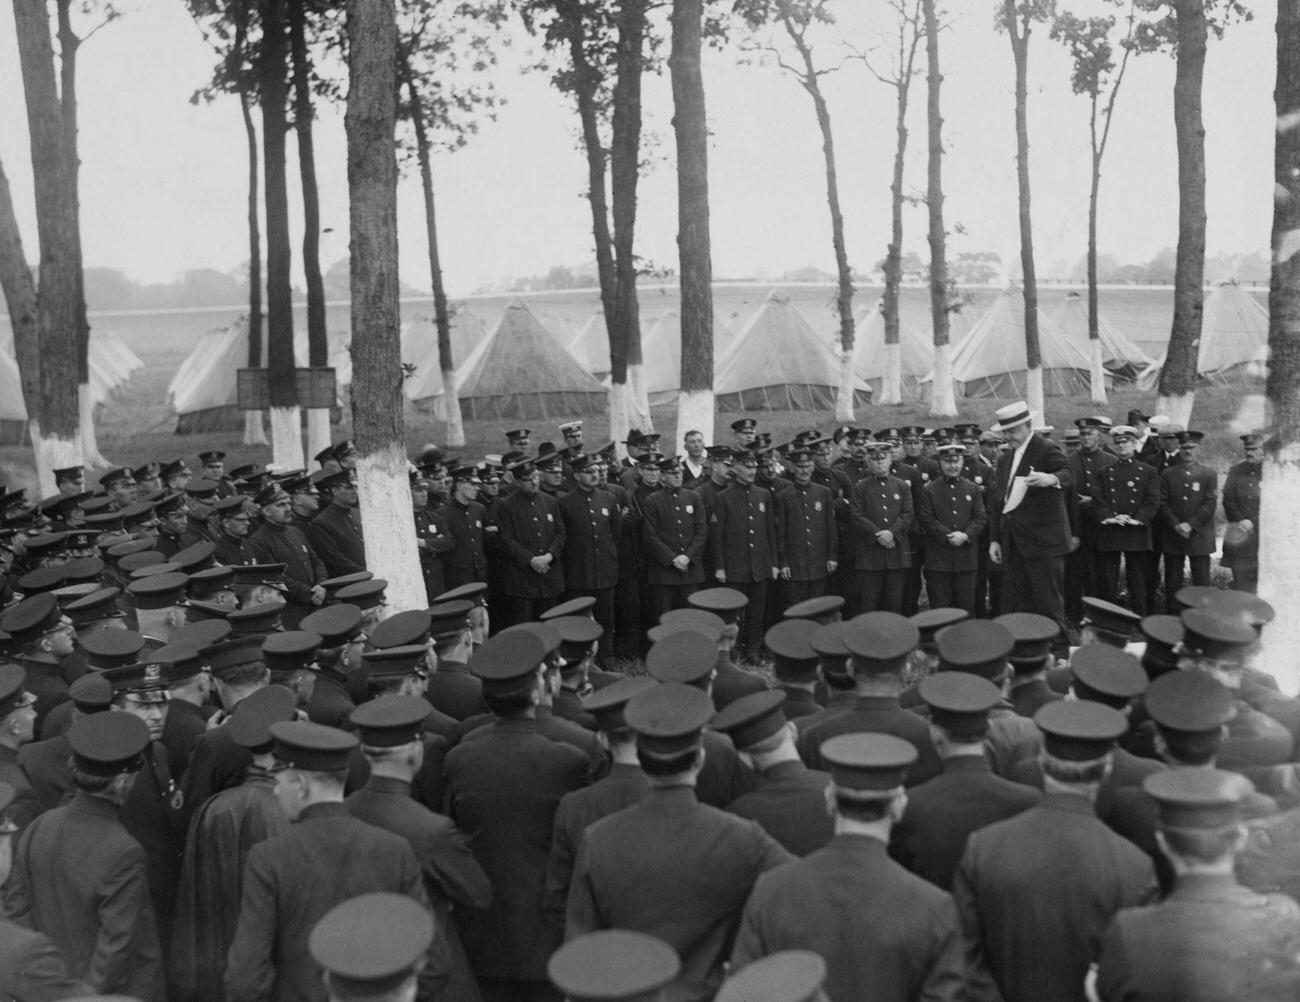 Nypd'S Annual 'Camp Fire' Meeting At Sheepshead Bay, Brooklyn, September 1918